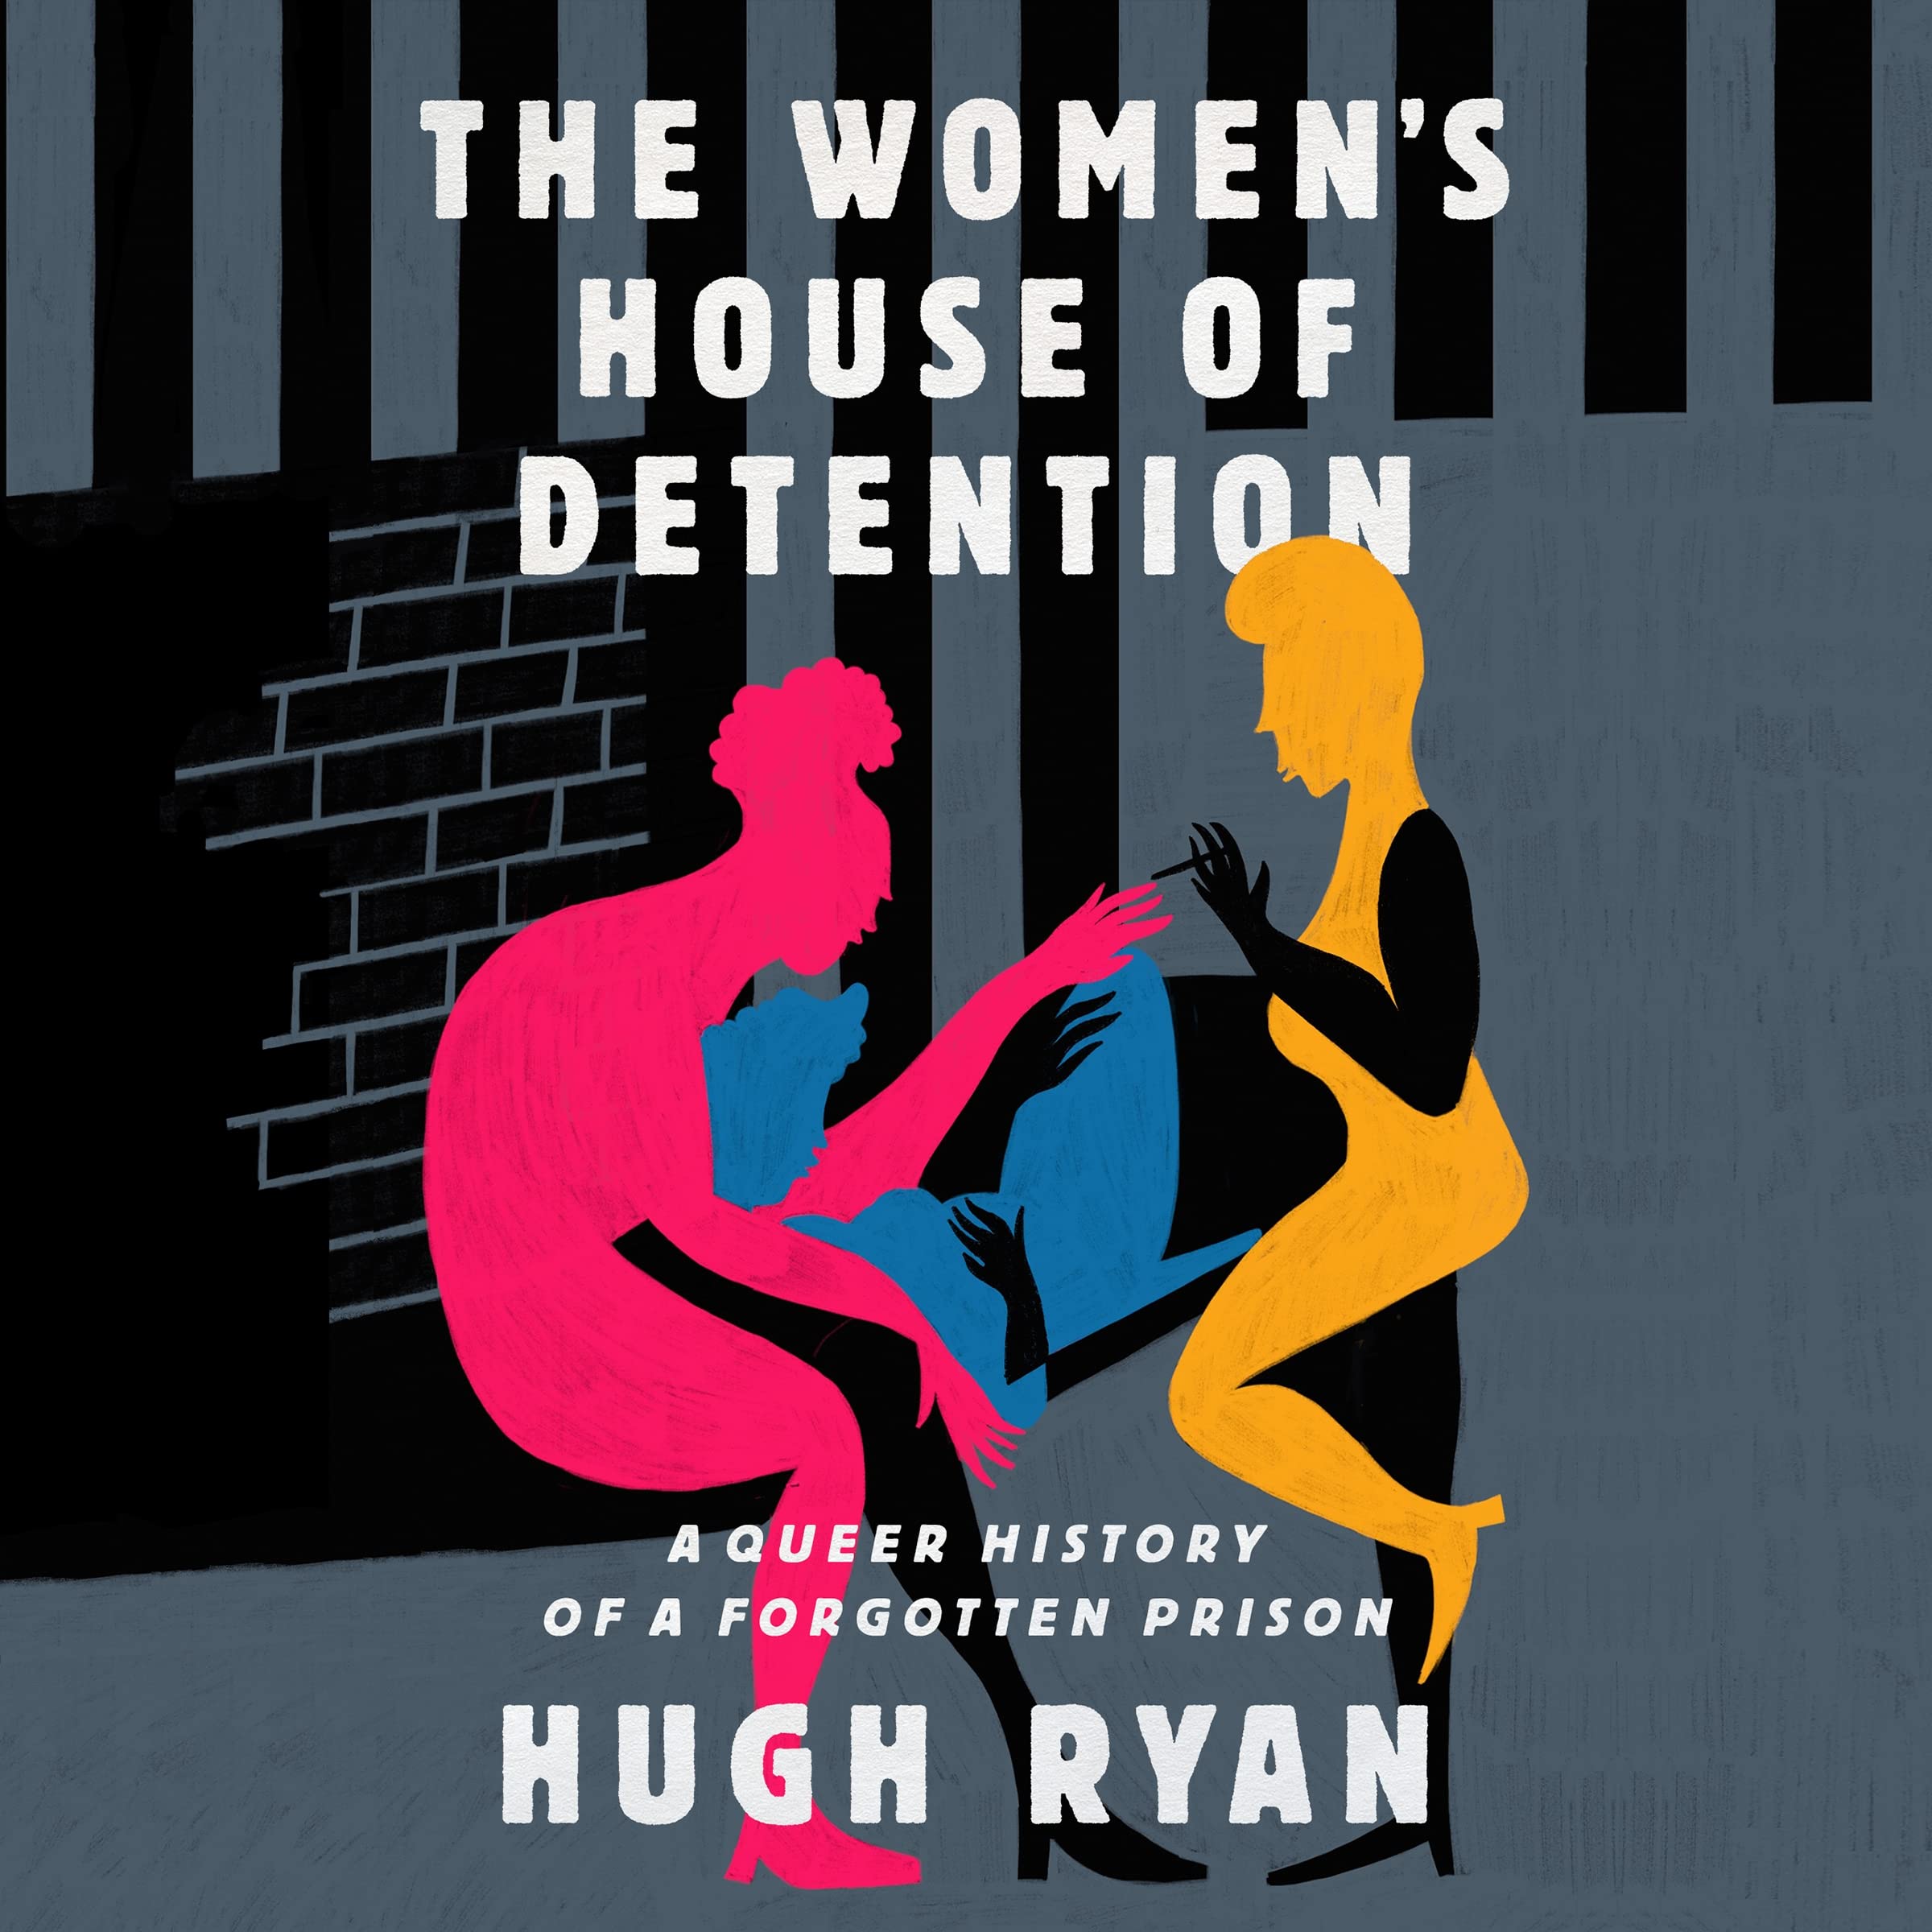 The Women’s House of Detention: A Queer History of a Forgotten Prison